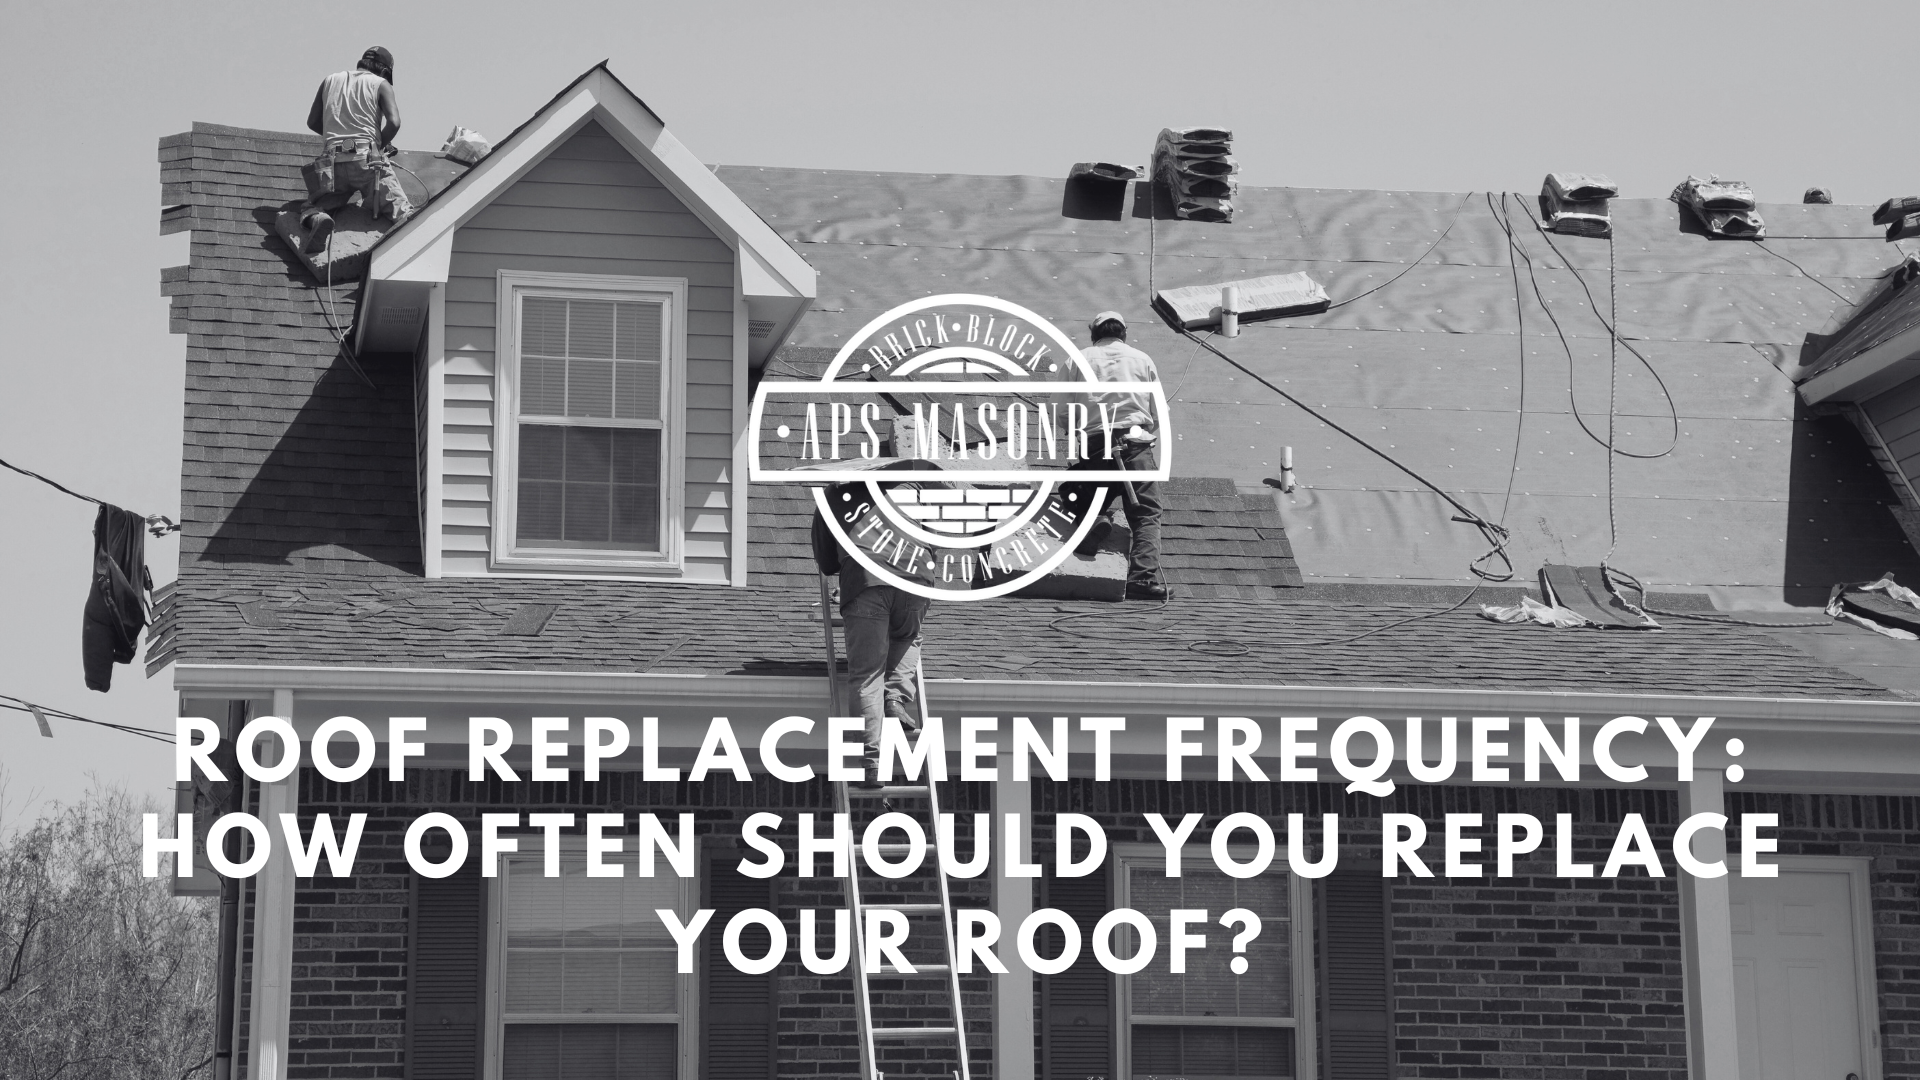 Roof Replacement Frequency: How Often Should You Replace Your Roof?